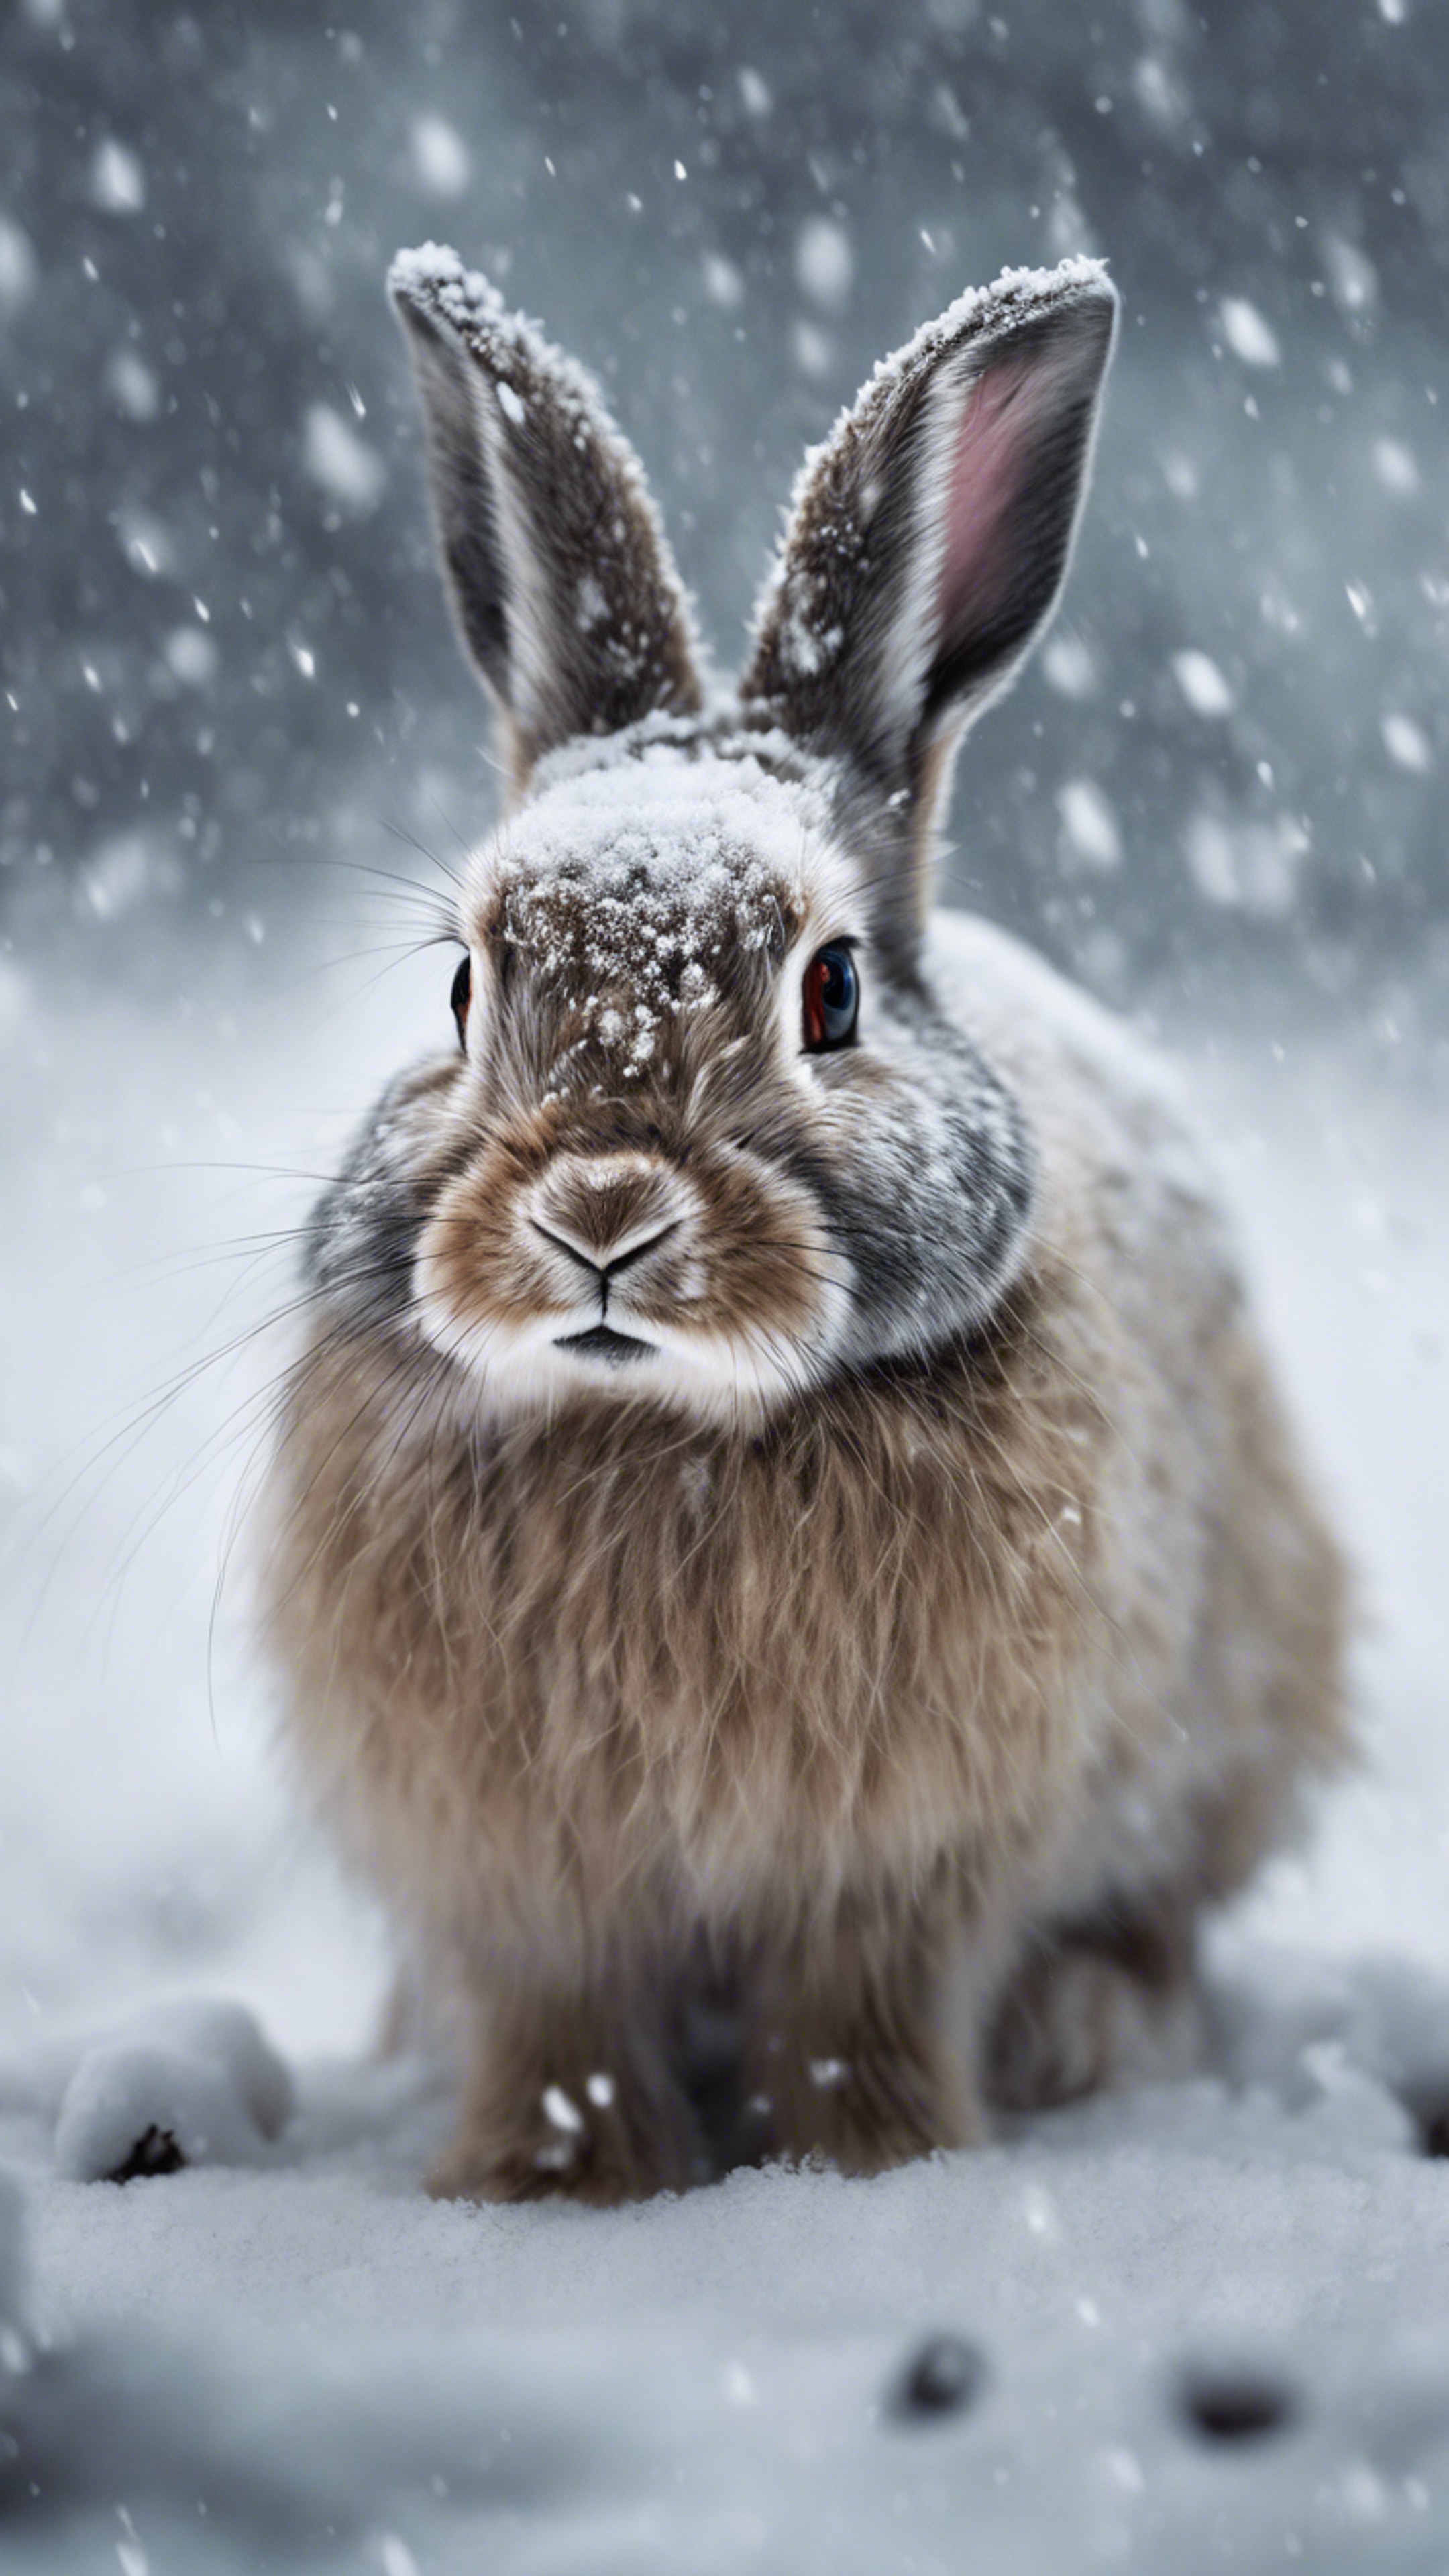 An Arctic rabbit braving a blizzard, its fur blending in with the snow.壁紙[f8597e39ec4d4470ac43]